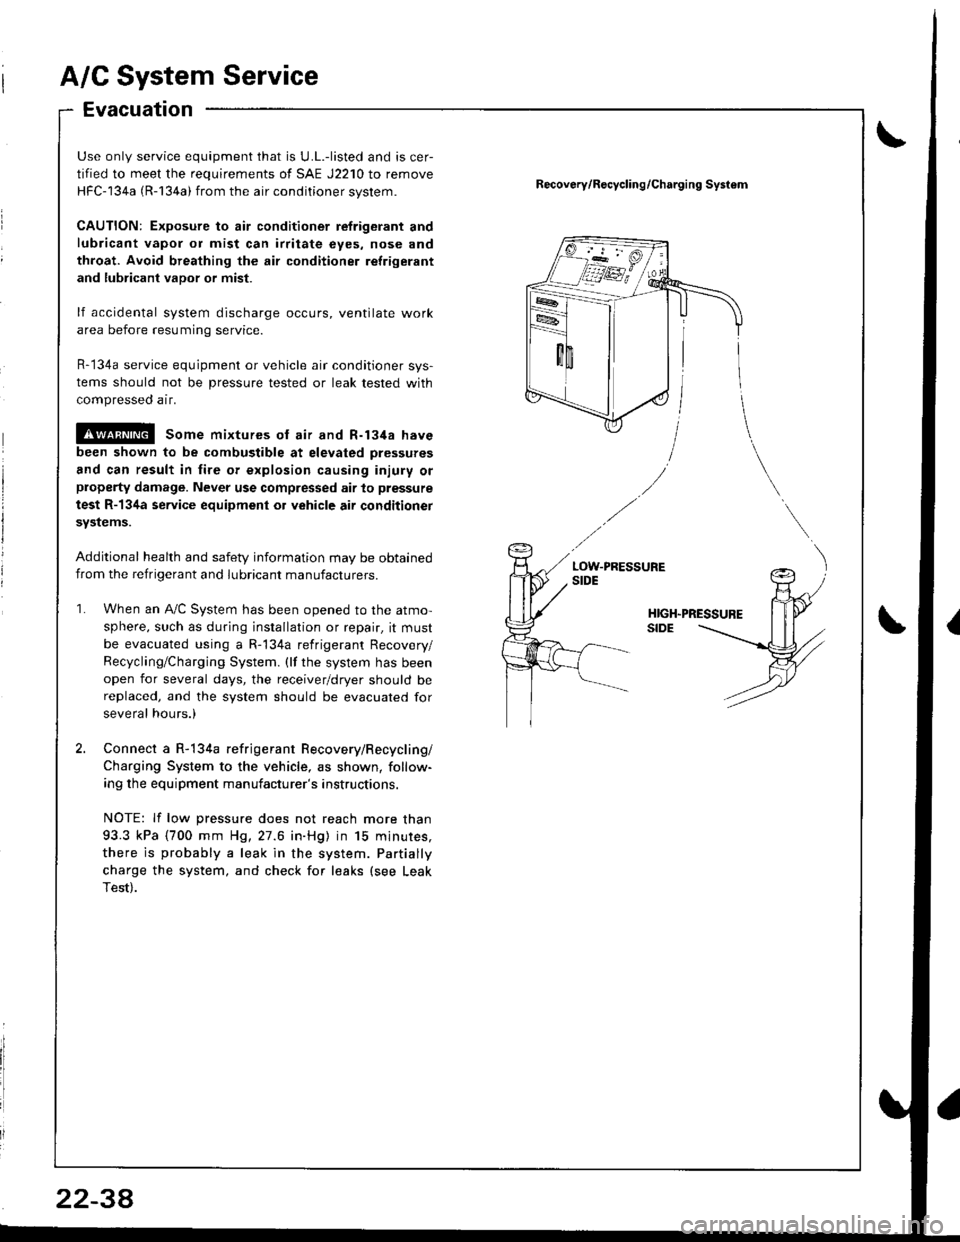 HONDA INTEGRA 1998 4.G User Guide A/C System Service
Evacuation
Use only service equipment that is U.L.-listed and is cer-
tified to meet the requirements of SAE J2210 to remove
HFC-134a (R-134a) from the air conditioner svstem.
CAUTI